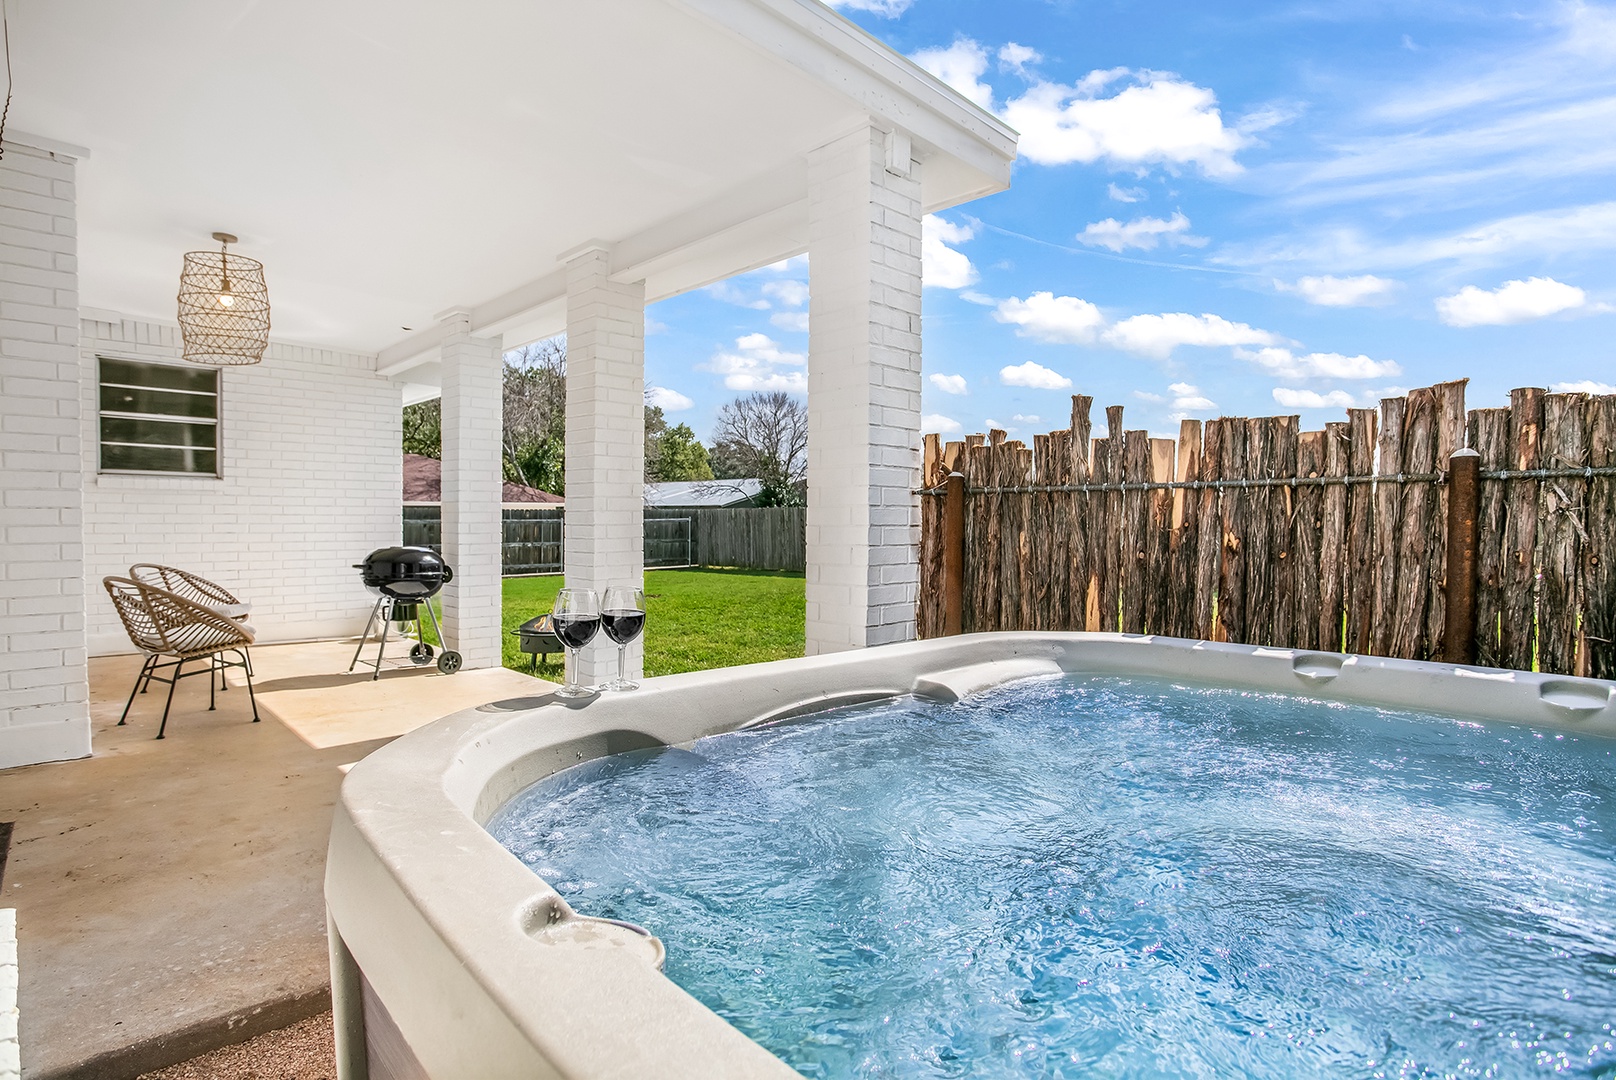 A Crystal Place | Hot Tub and Fire pit | 1 Blk off Main St